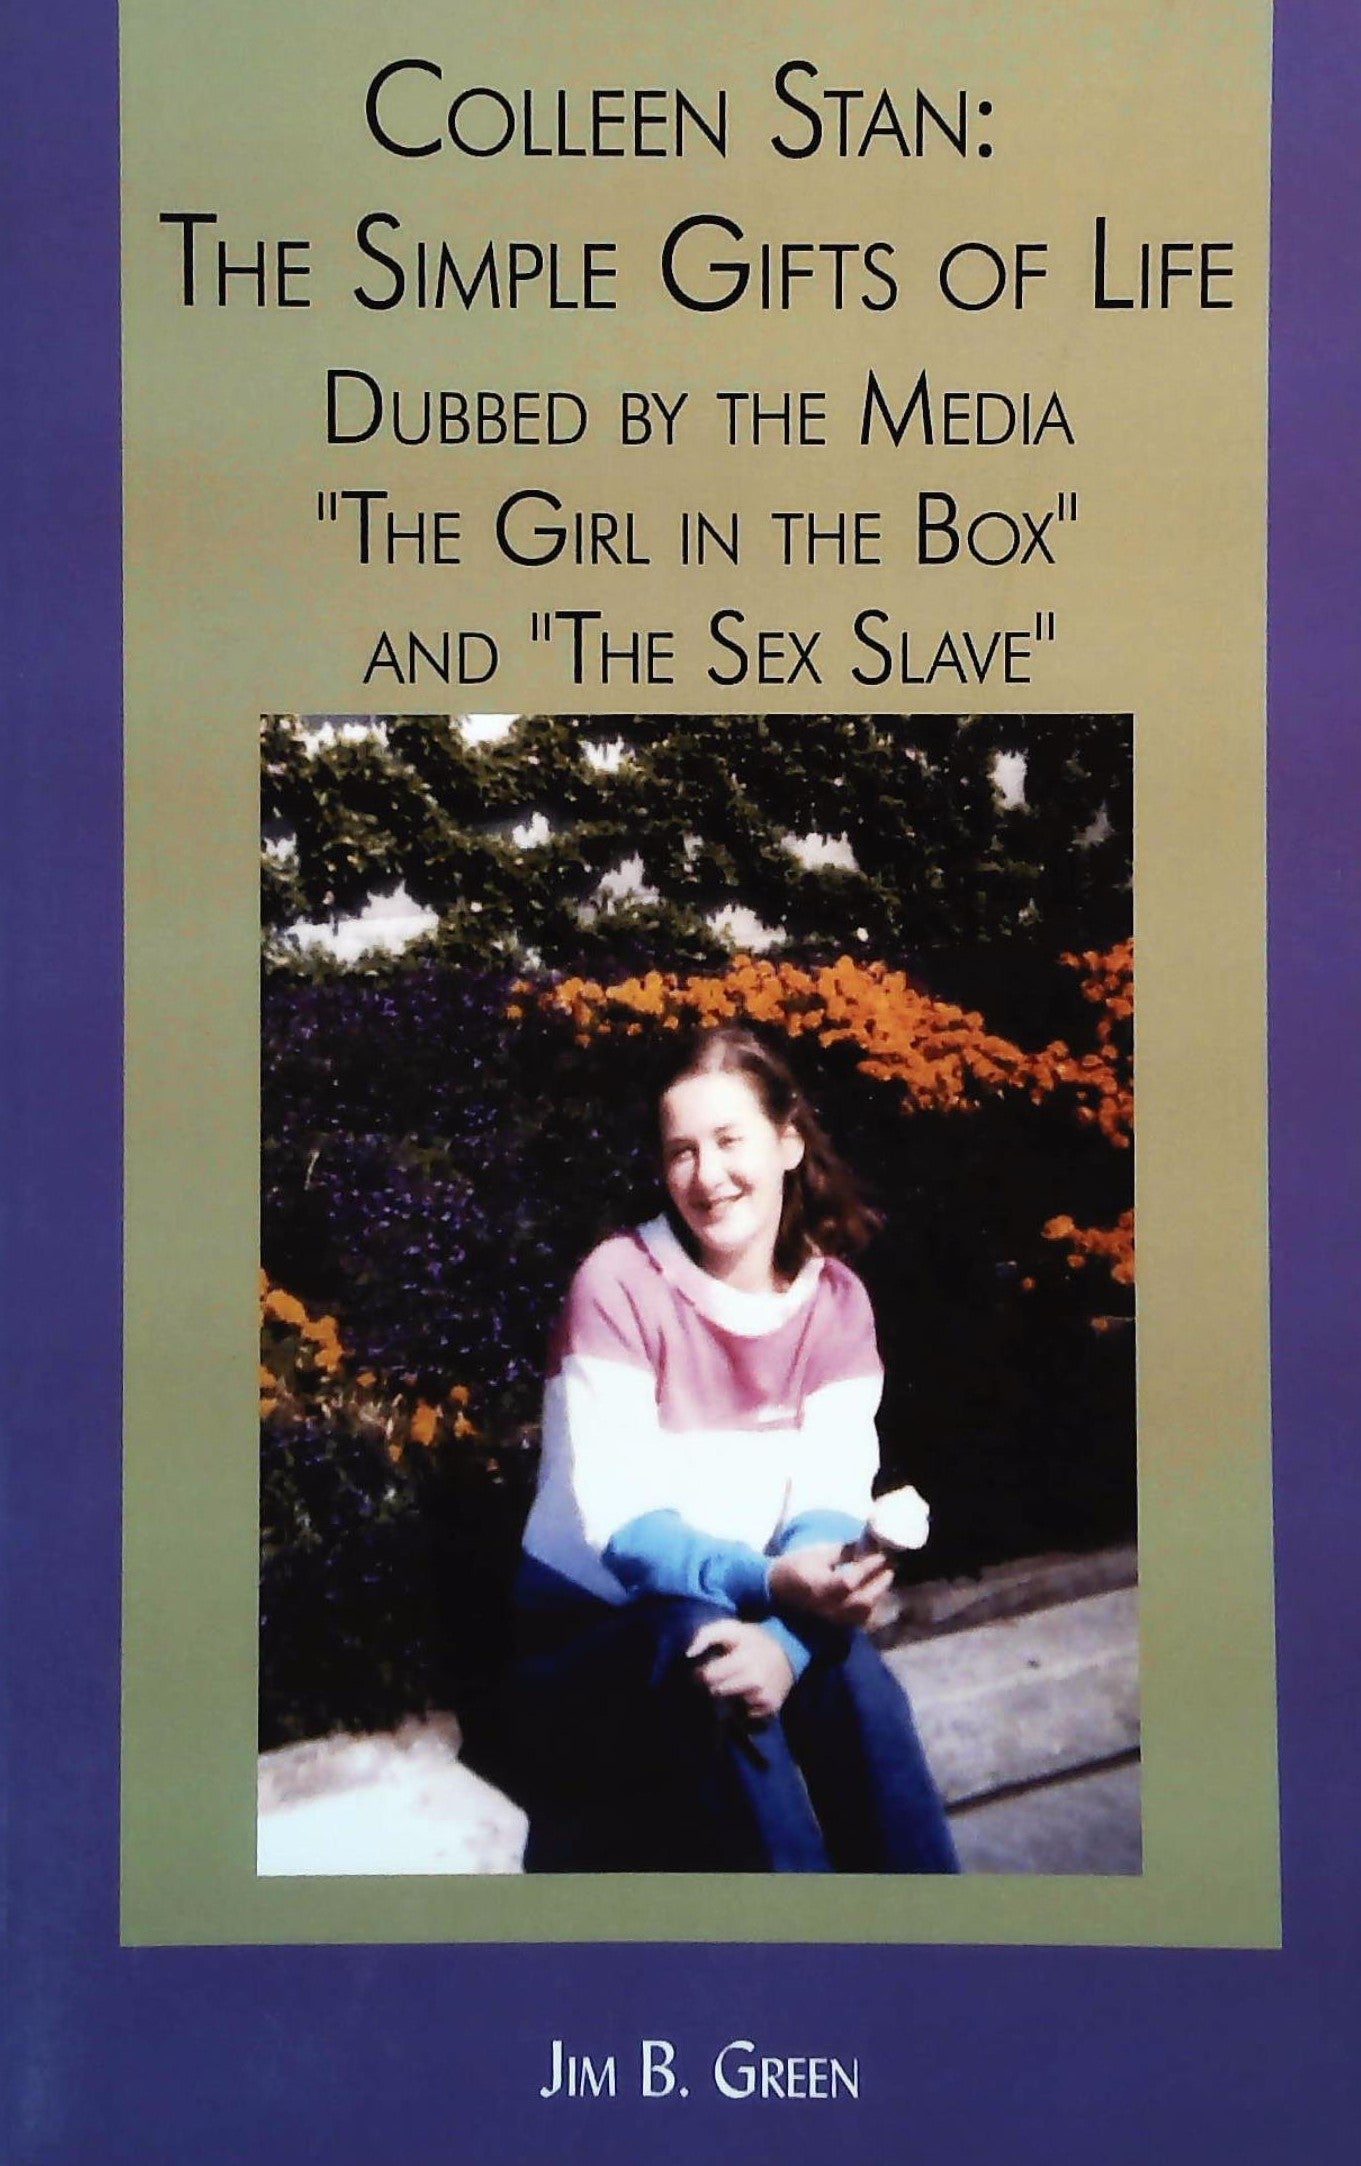 Livre ISBN 144011837X Colleen Stan: The Simple Gifts of Life: Dubbed by the Media The Girl in the Box and The Sex Slave (Jim B. Green)